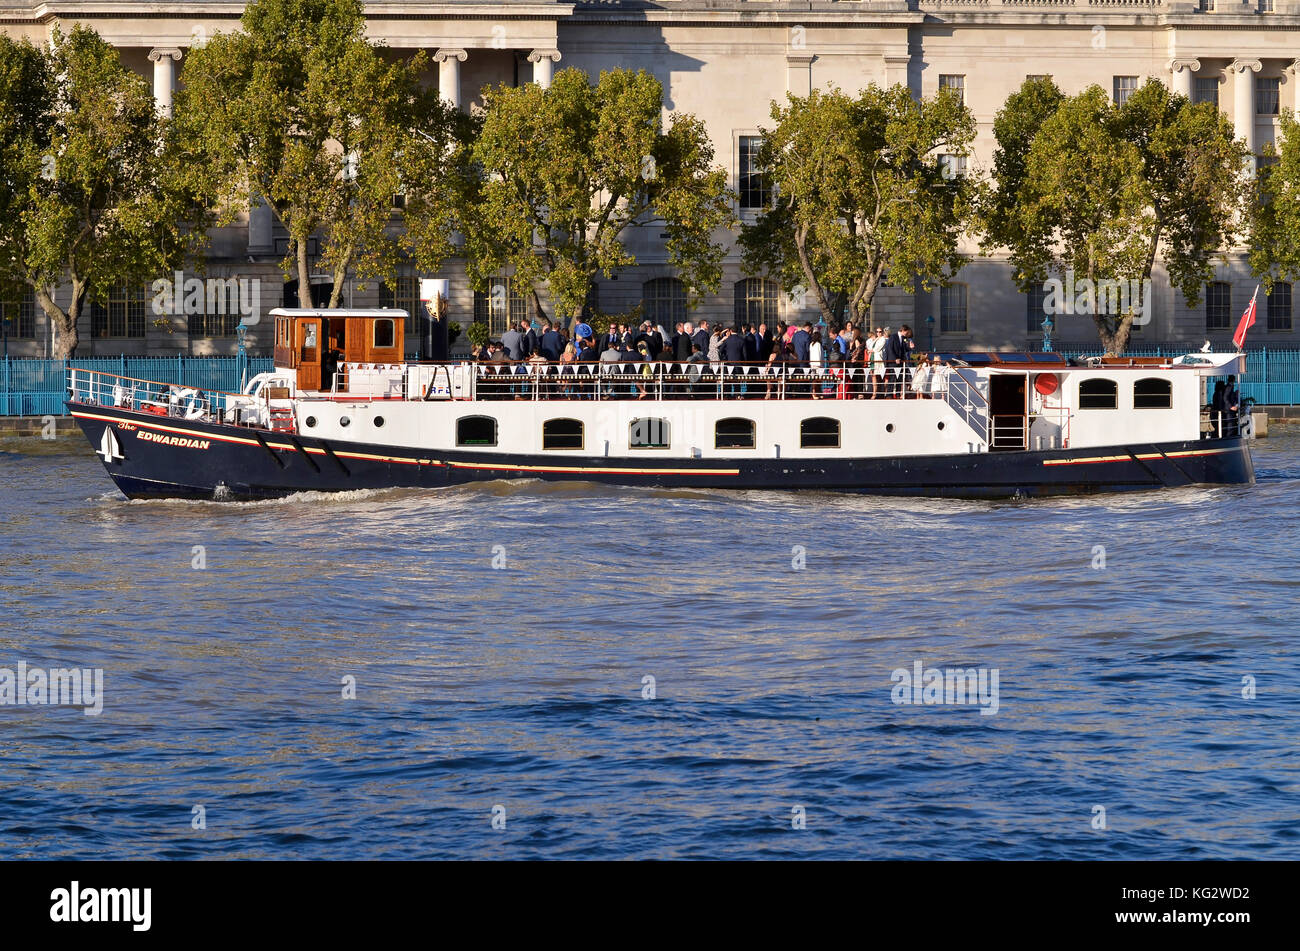 Edwardian luxury charter boat, River Thames, London, UK. The Edwardian is operated by Thames Luxury Charters It is available for parties and events. Stock Photo